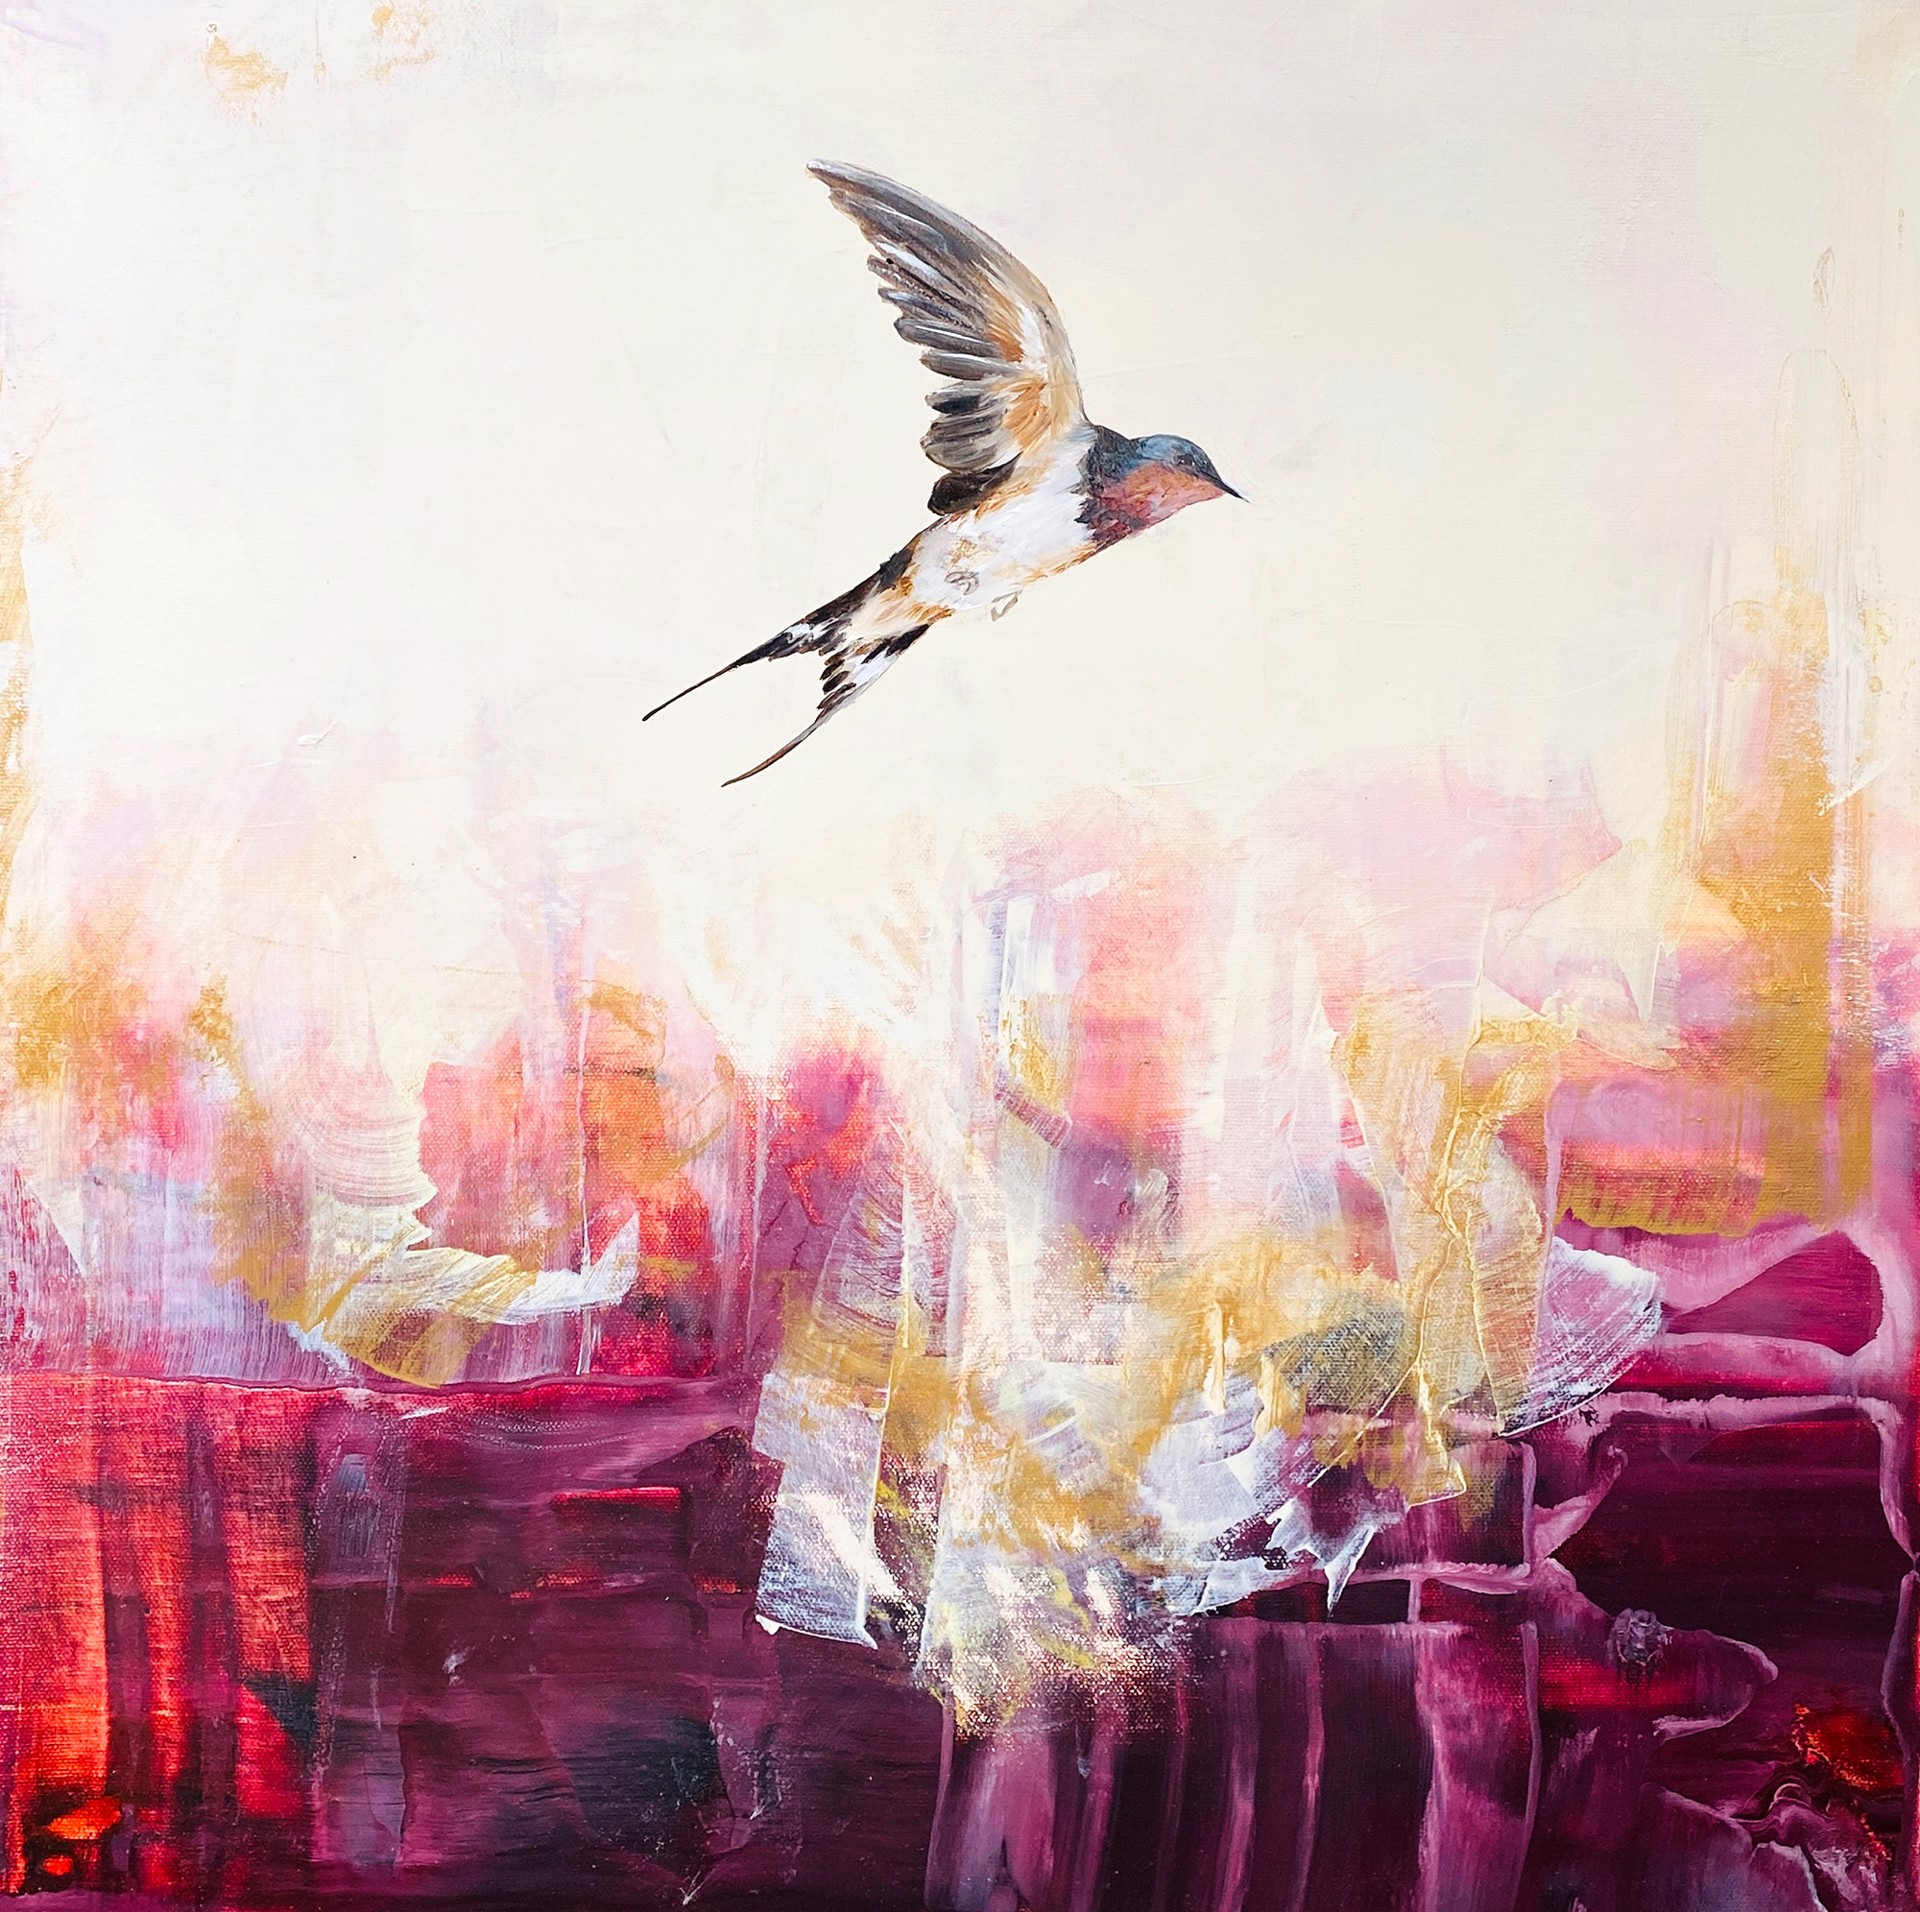 Original Oil Painting By Jenna Von Benedikt With A Swallow On A Pink Abstract Background